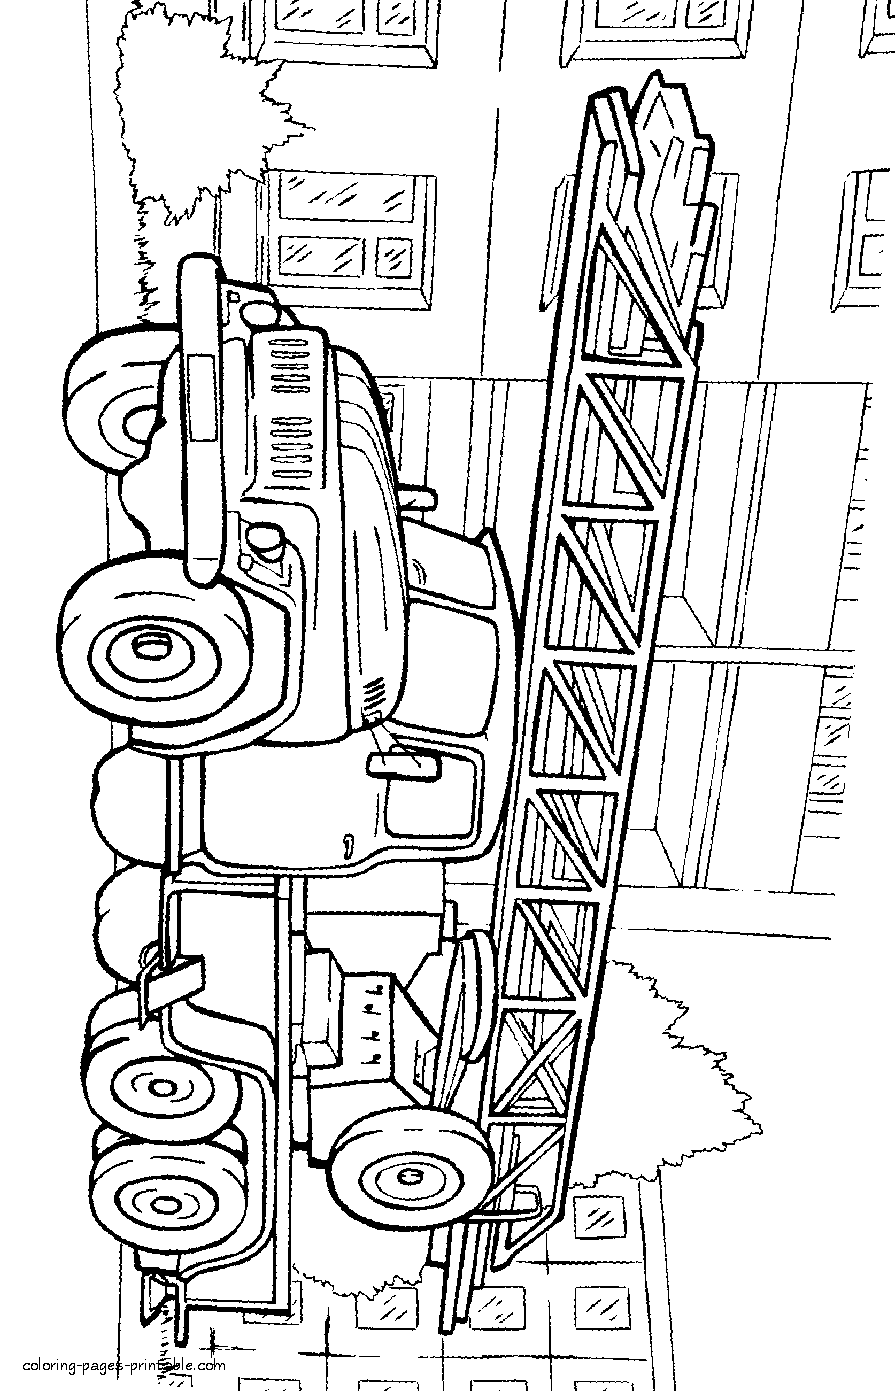 Fire truck coloring pages. Made in USSR